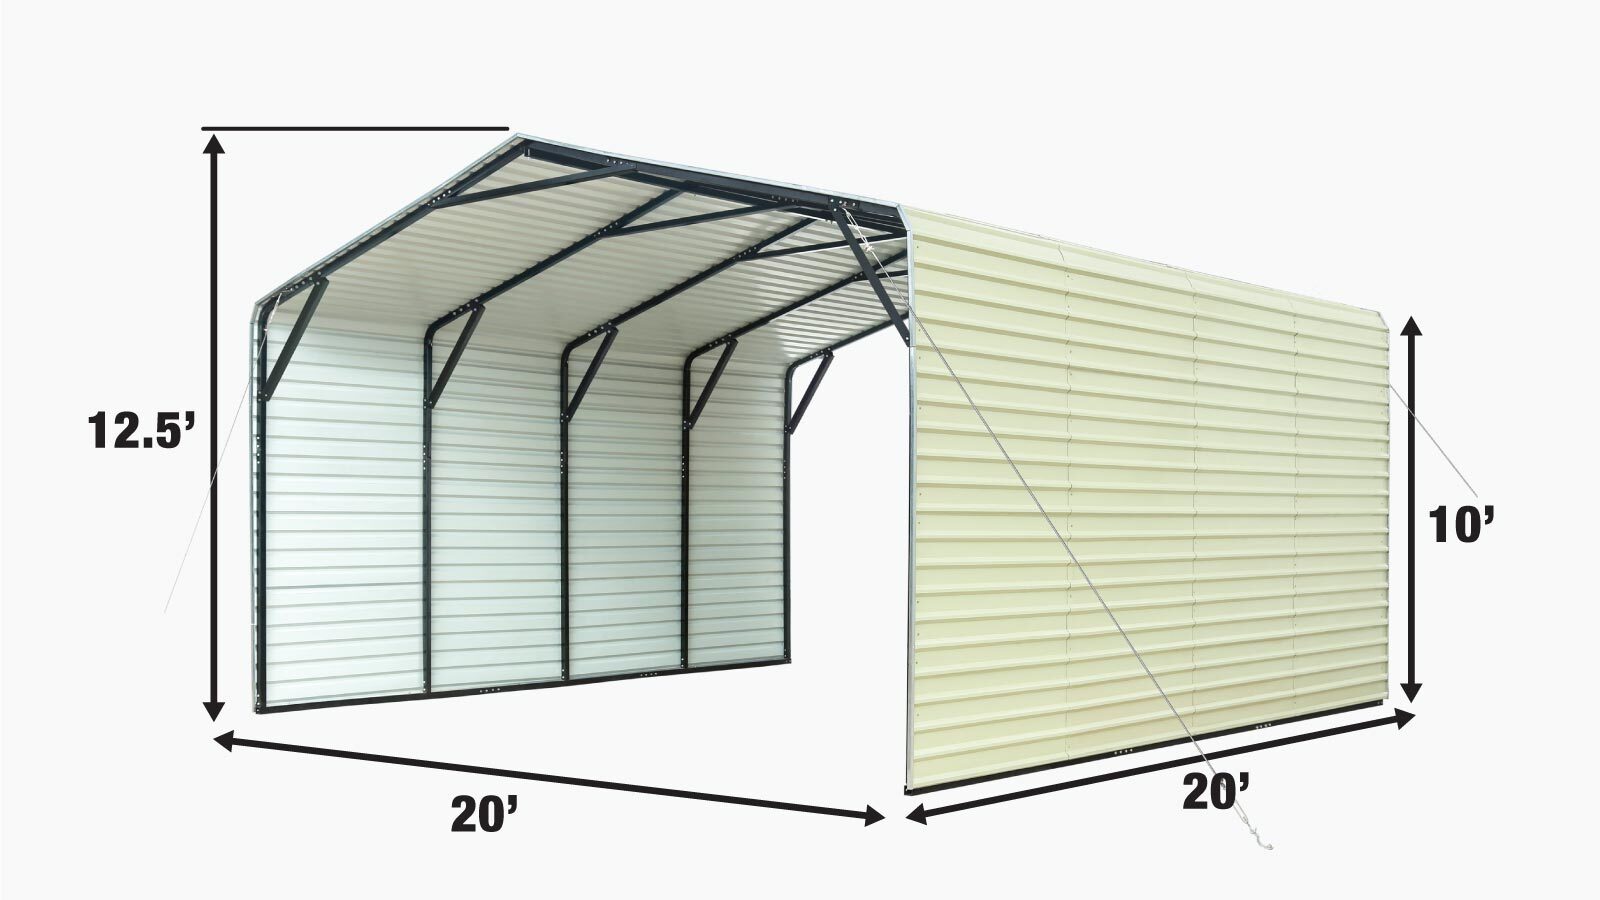 TMG Industrial 20’ x 20’ All-Steel Carport w/10’ Enclosed Sidewalls, Galvanized Roof, Powder Coated, Polyester Paint Coating, Stabilizing Cables, TMG-CP2020F (not available online purchase)-specifications-image